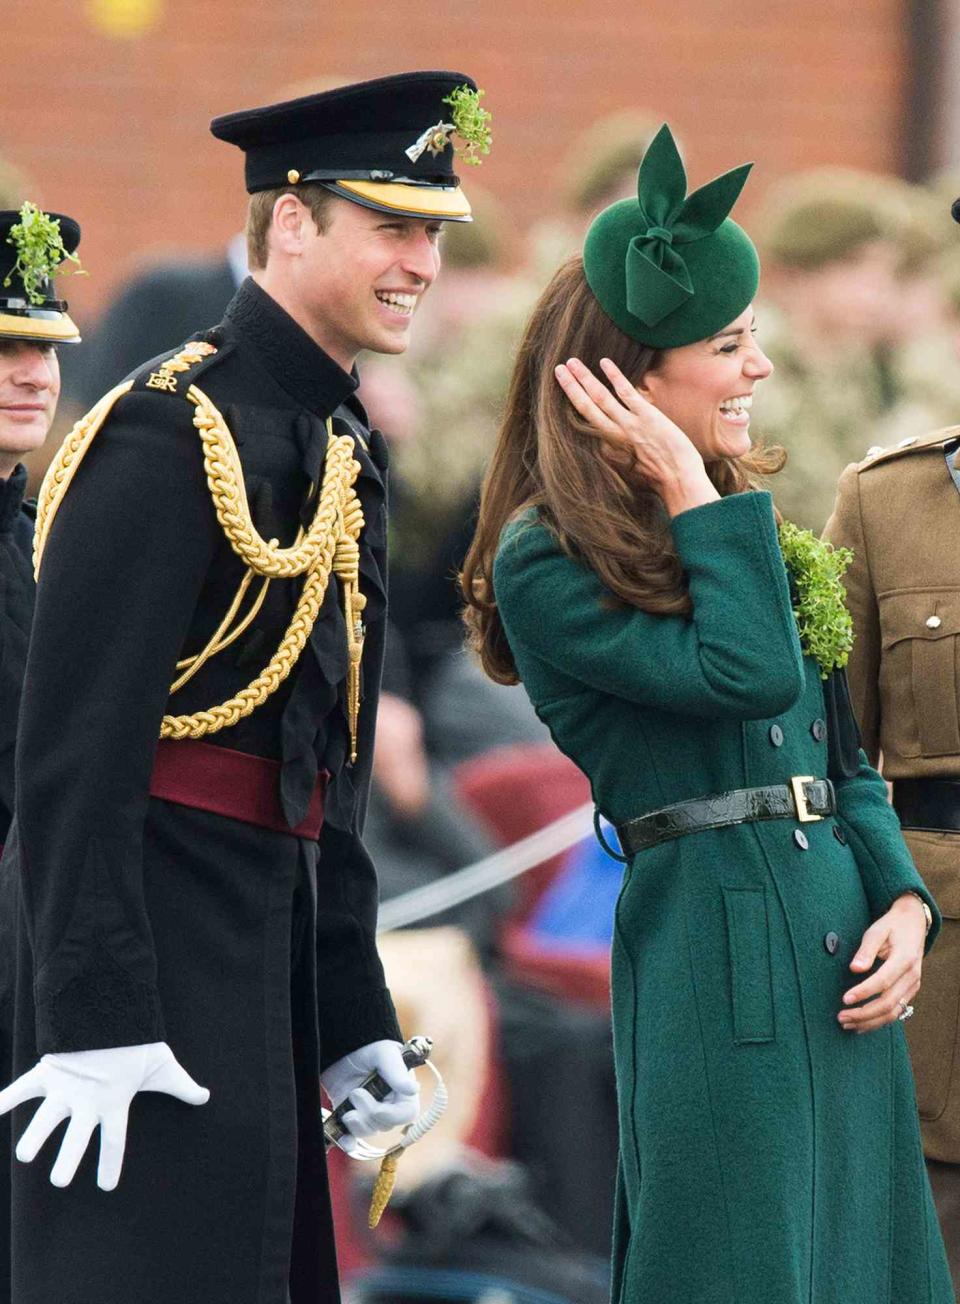 Prince William, Duke of Cambridge and Catherine, Duchess of Cambridge attend the St Patrick's Day parade at Mons Barracks on March 17, 2014 in Aldershot, England